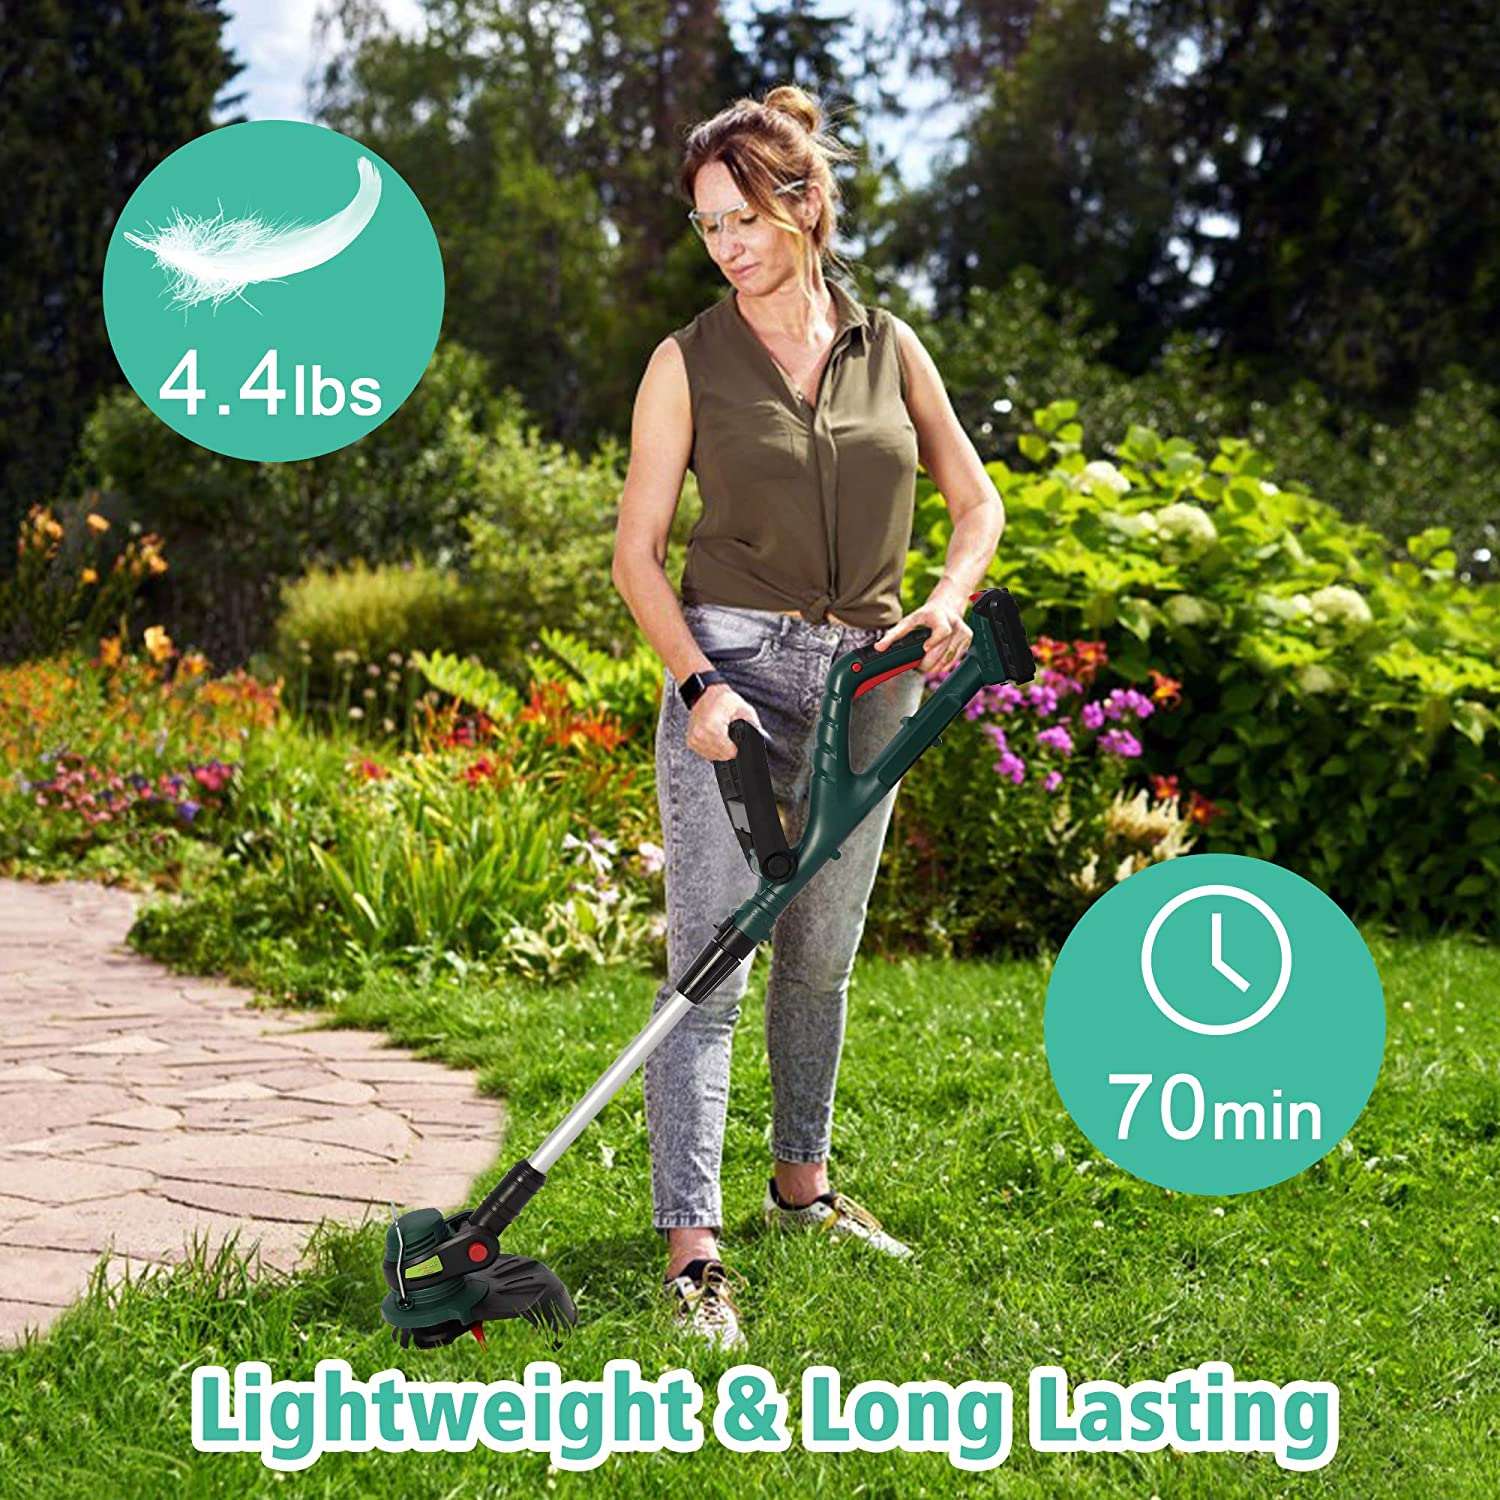 20V Cordless String Trimmer/Edger, 4.4 LBS, 70min Lithium-Ion Brushless Trimmer, yard, w/auto Feed, Extension Pole, Adjustable Head & Handle, 10” Cutting Path, 2.0Ah Battery & Charger Included